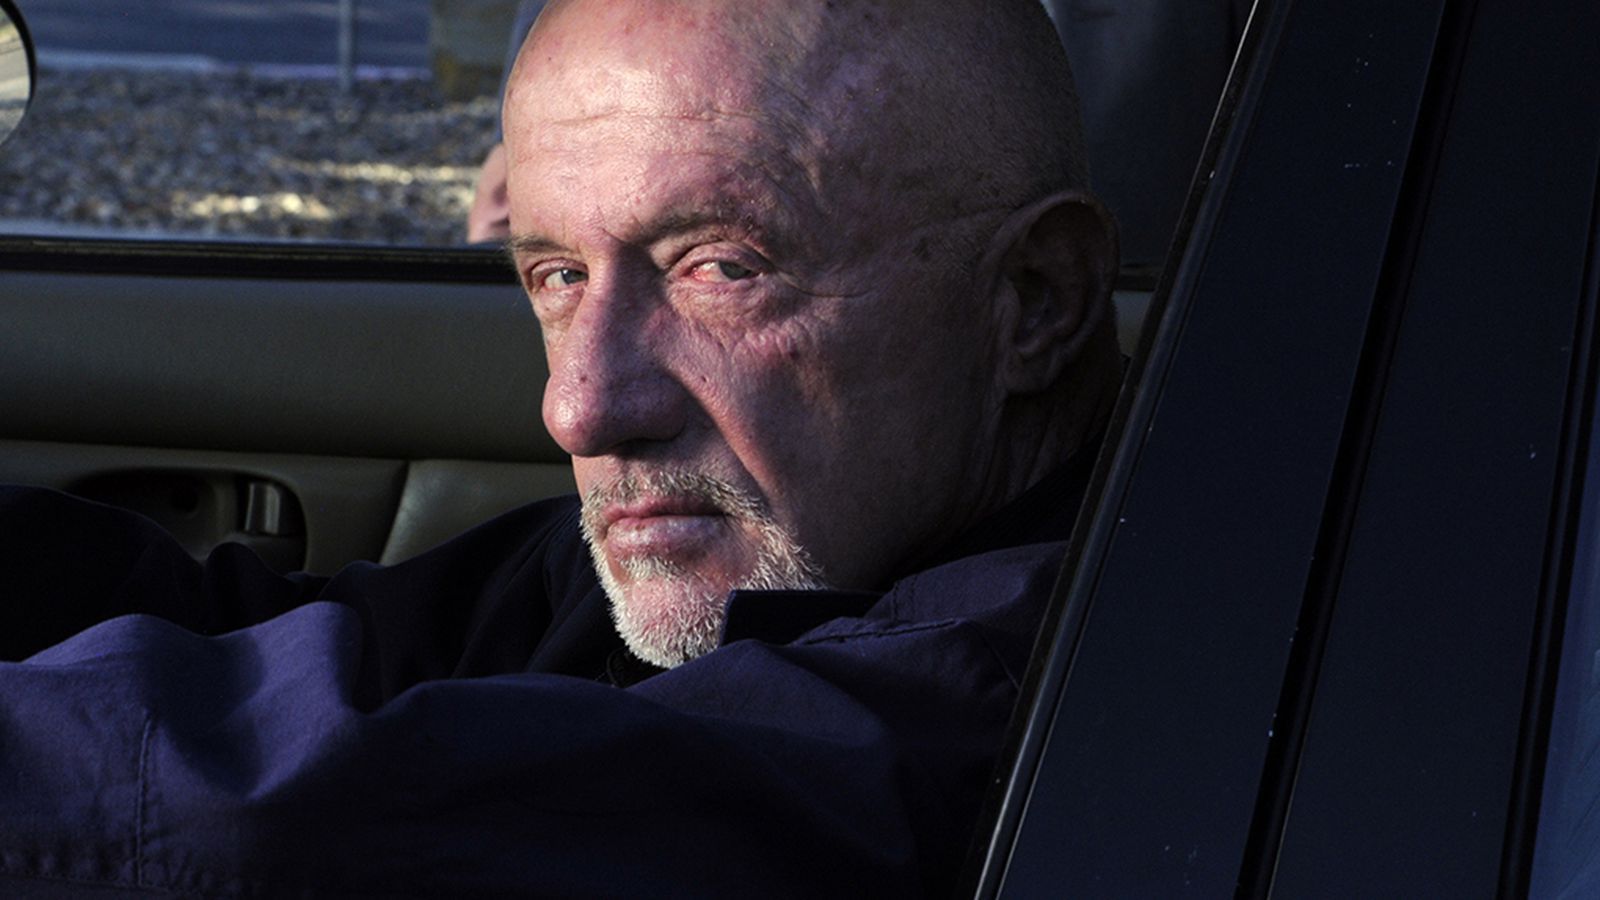 Breaking Bad' spinoff 'Better Call Saul' adds Jonathan Banks to its cast